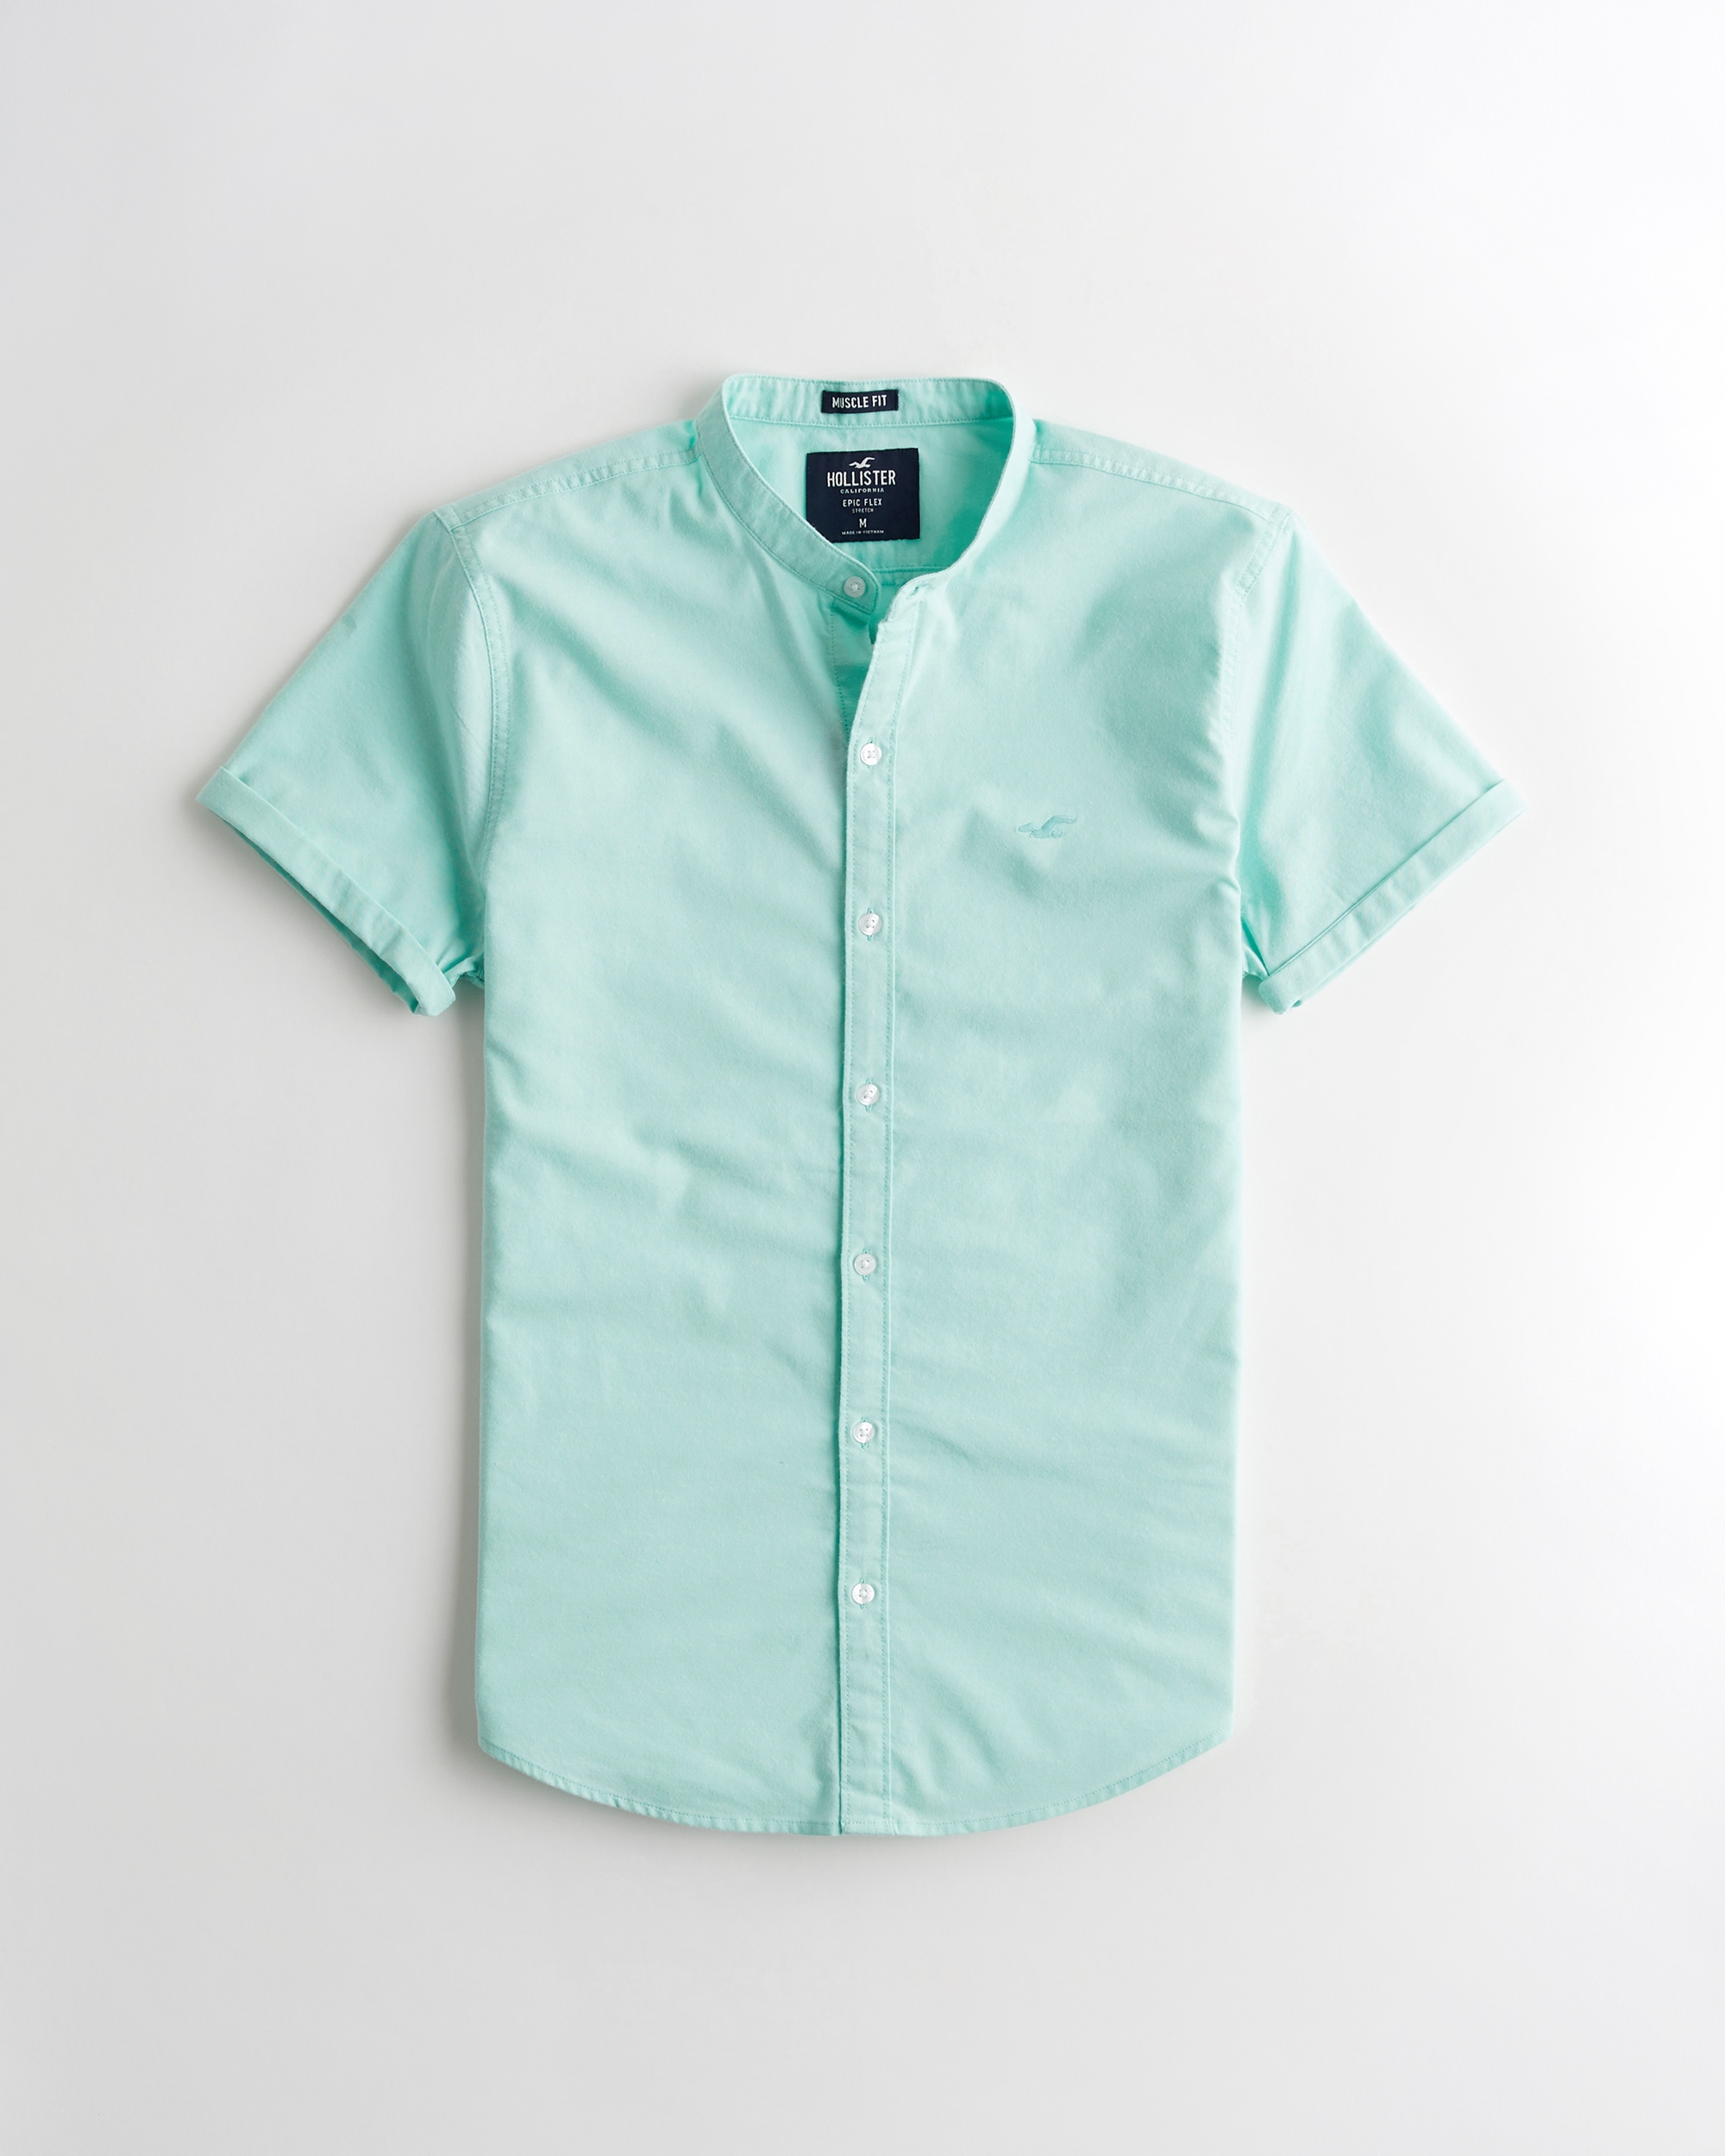 hollister mens shirts clearance